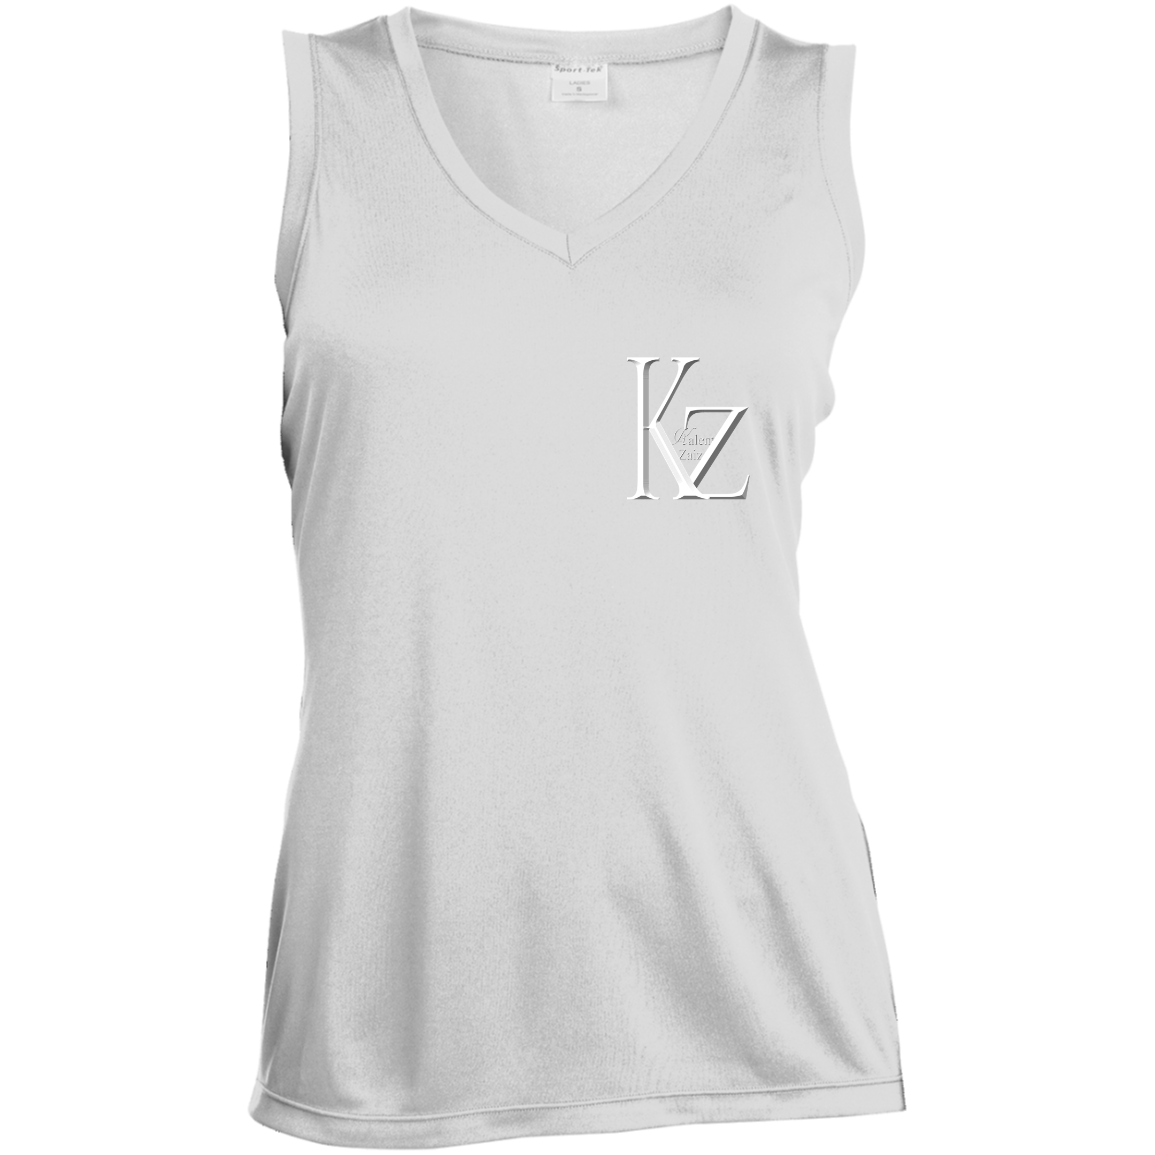 Kalent Zaiz LST352 Ladies' Sleeveless Moisture Absorbing V-Neck  3.8-ounce, 100% polyester interlock with PosiCharge technology Gently contoured silhouette Double-needle armholes and hem Decoration type: Digital Print